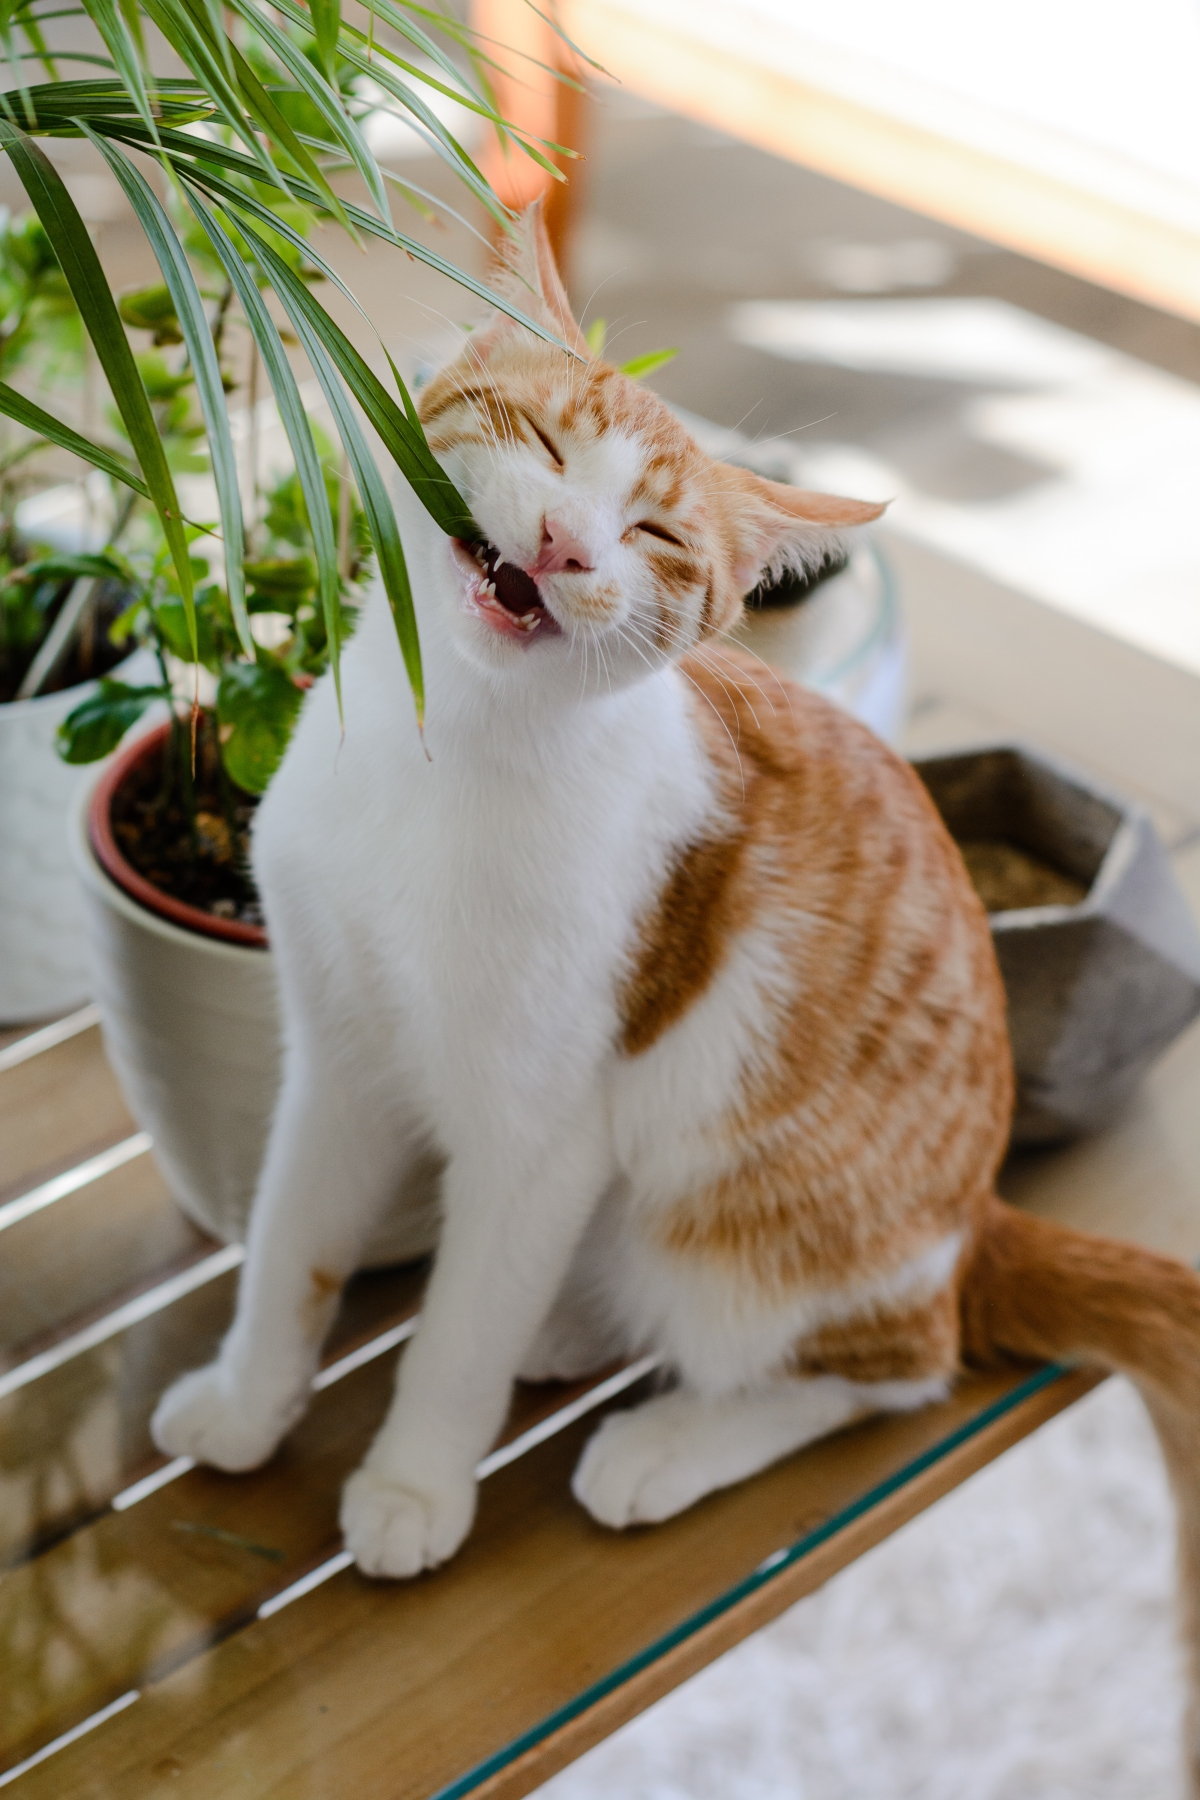 Quirky Cat Behaviors - 5 Reasons Why They Happen